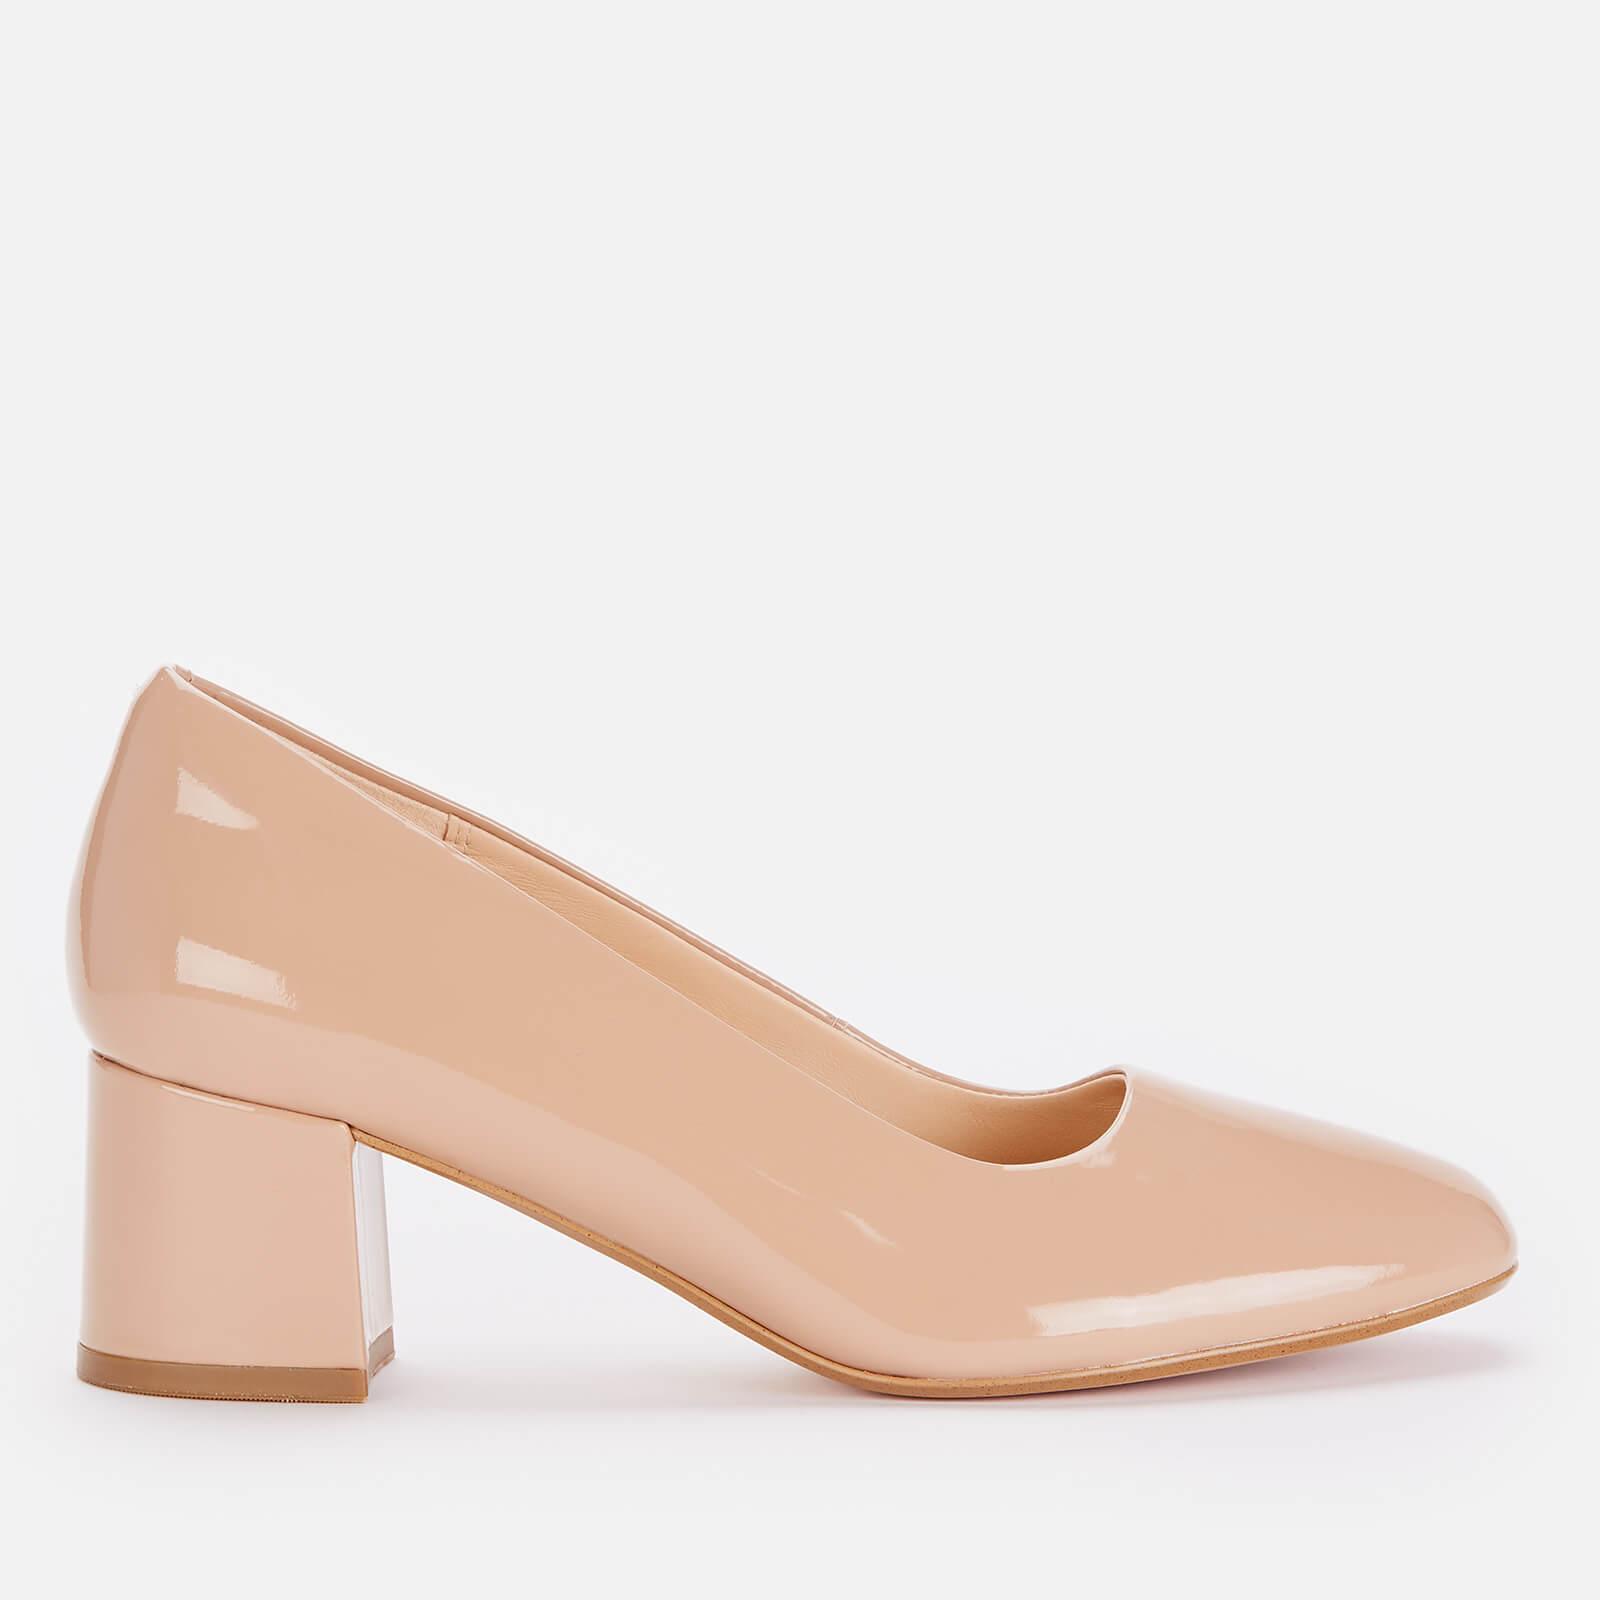 Clarks Sheer 55 Patent Court Shoes in Brown | Lyst